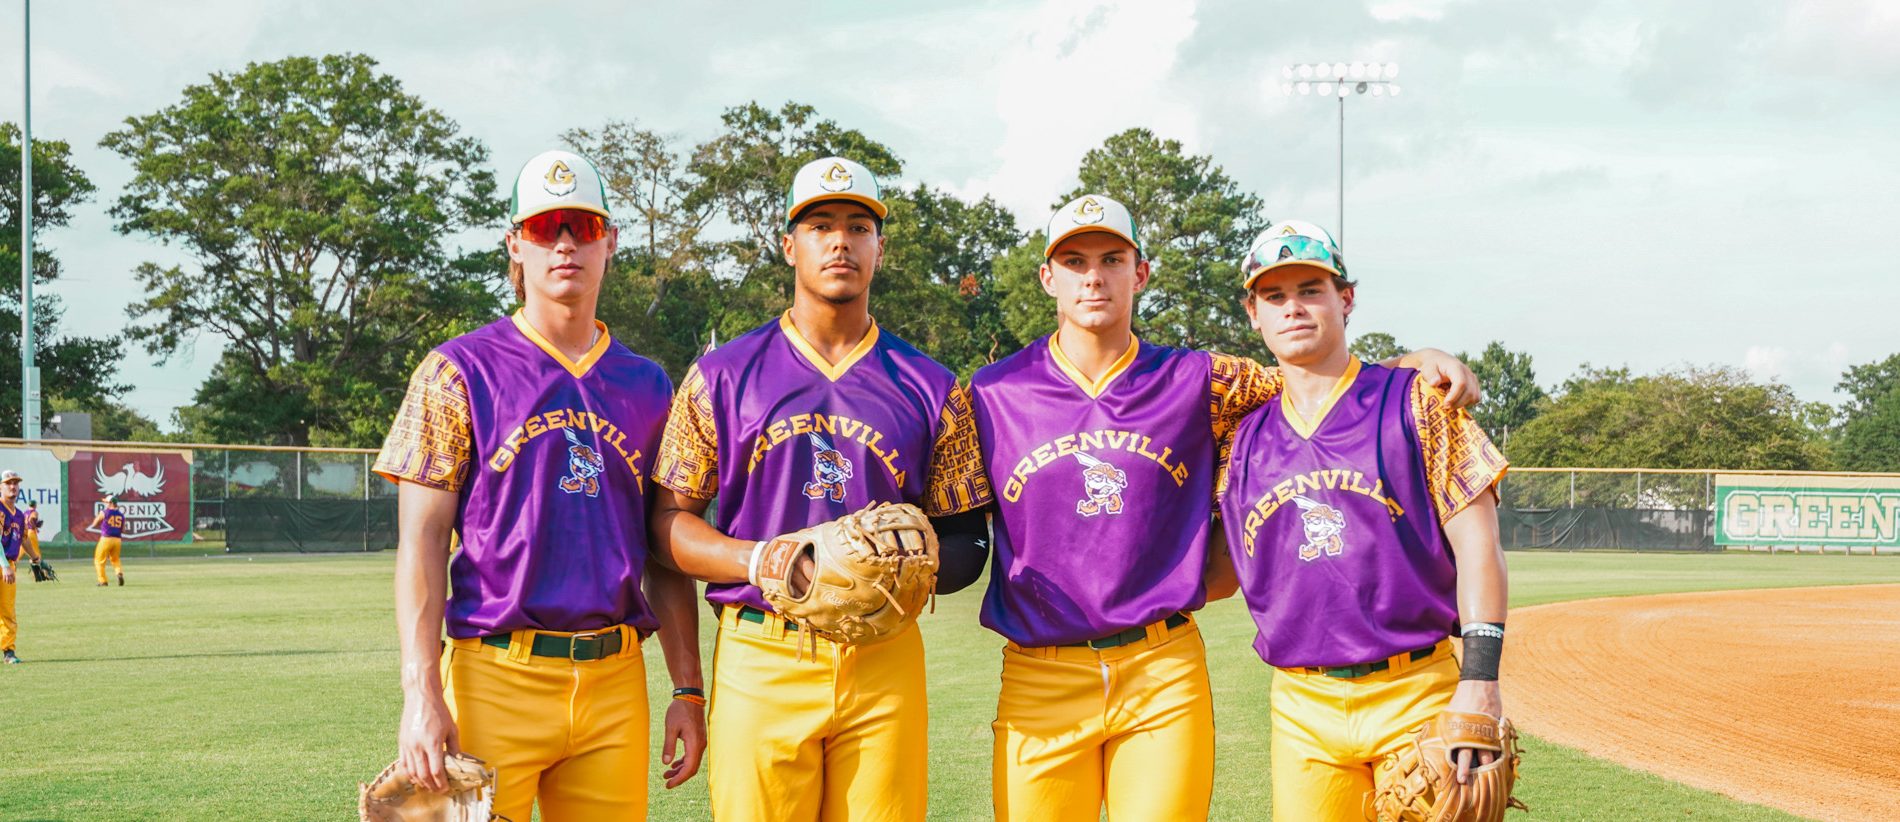 “‘Purple’ Reign! Herring’s Grand Slam, Marcotte’s Pitching Equal Victory As Greenville Doubles Up Wilson 8-4 On Pirate Alumni Night Sponsored By ECU Alumni Association”